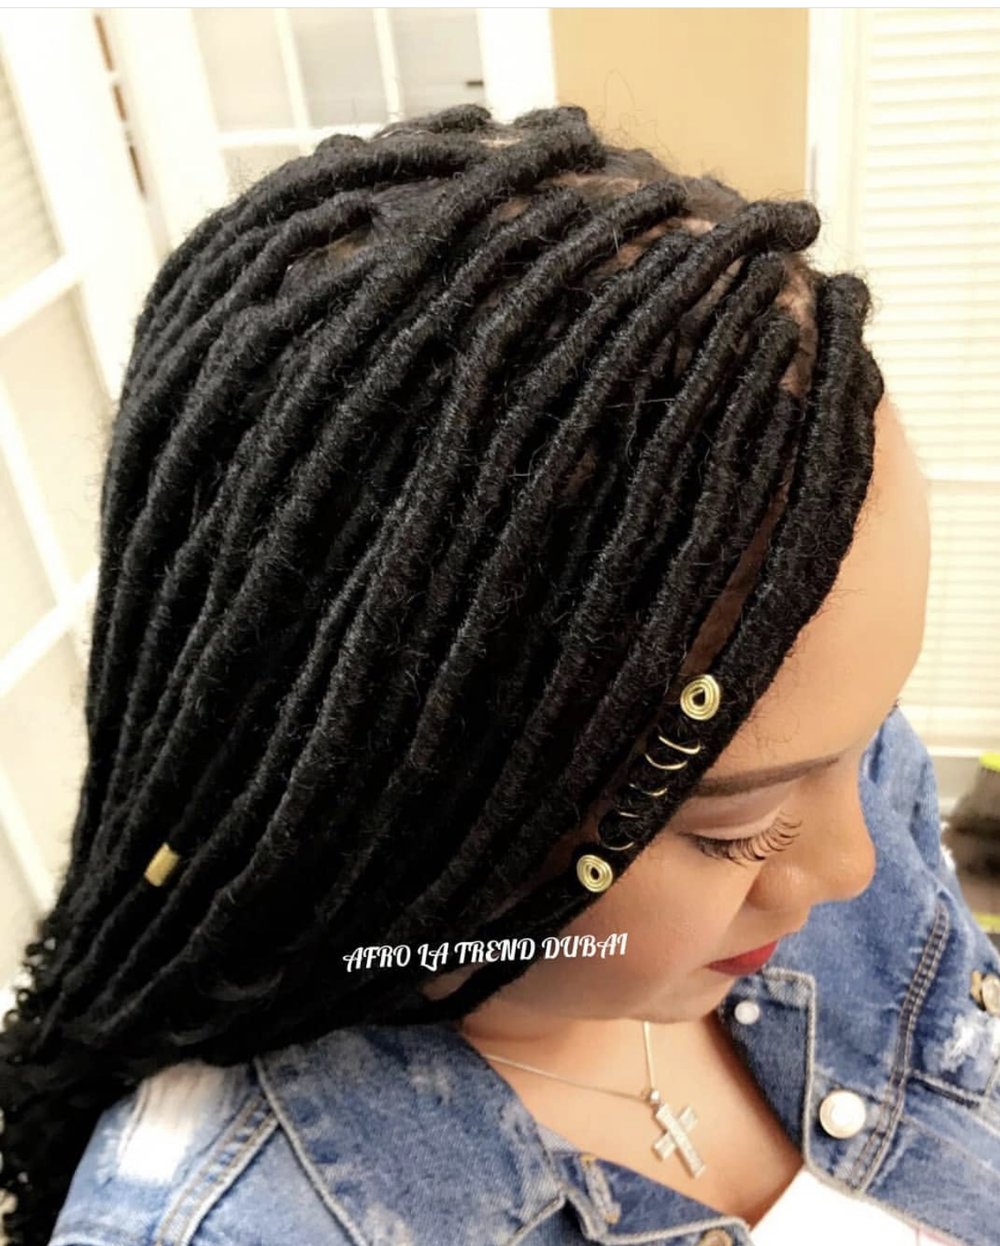 Afro hair how to dreadlocks start How to